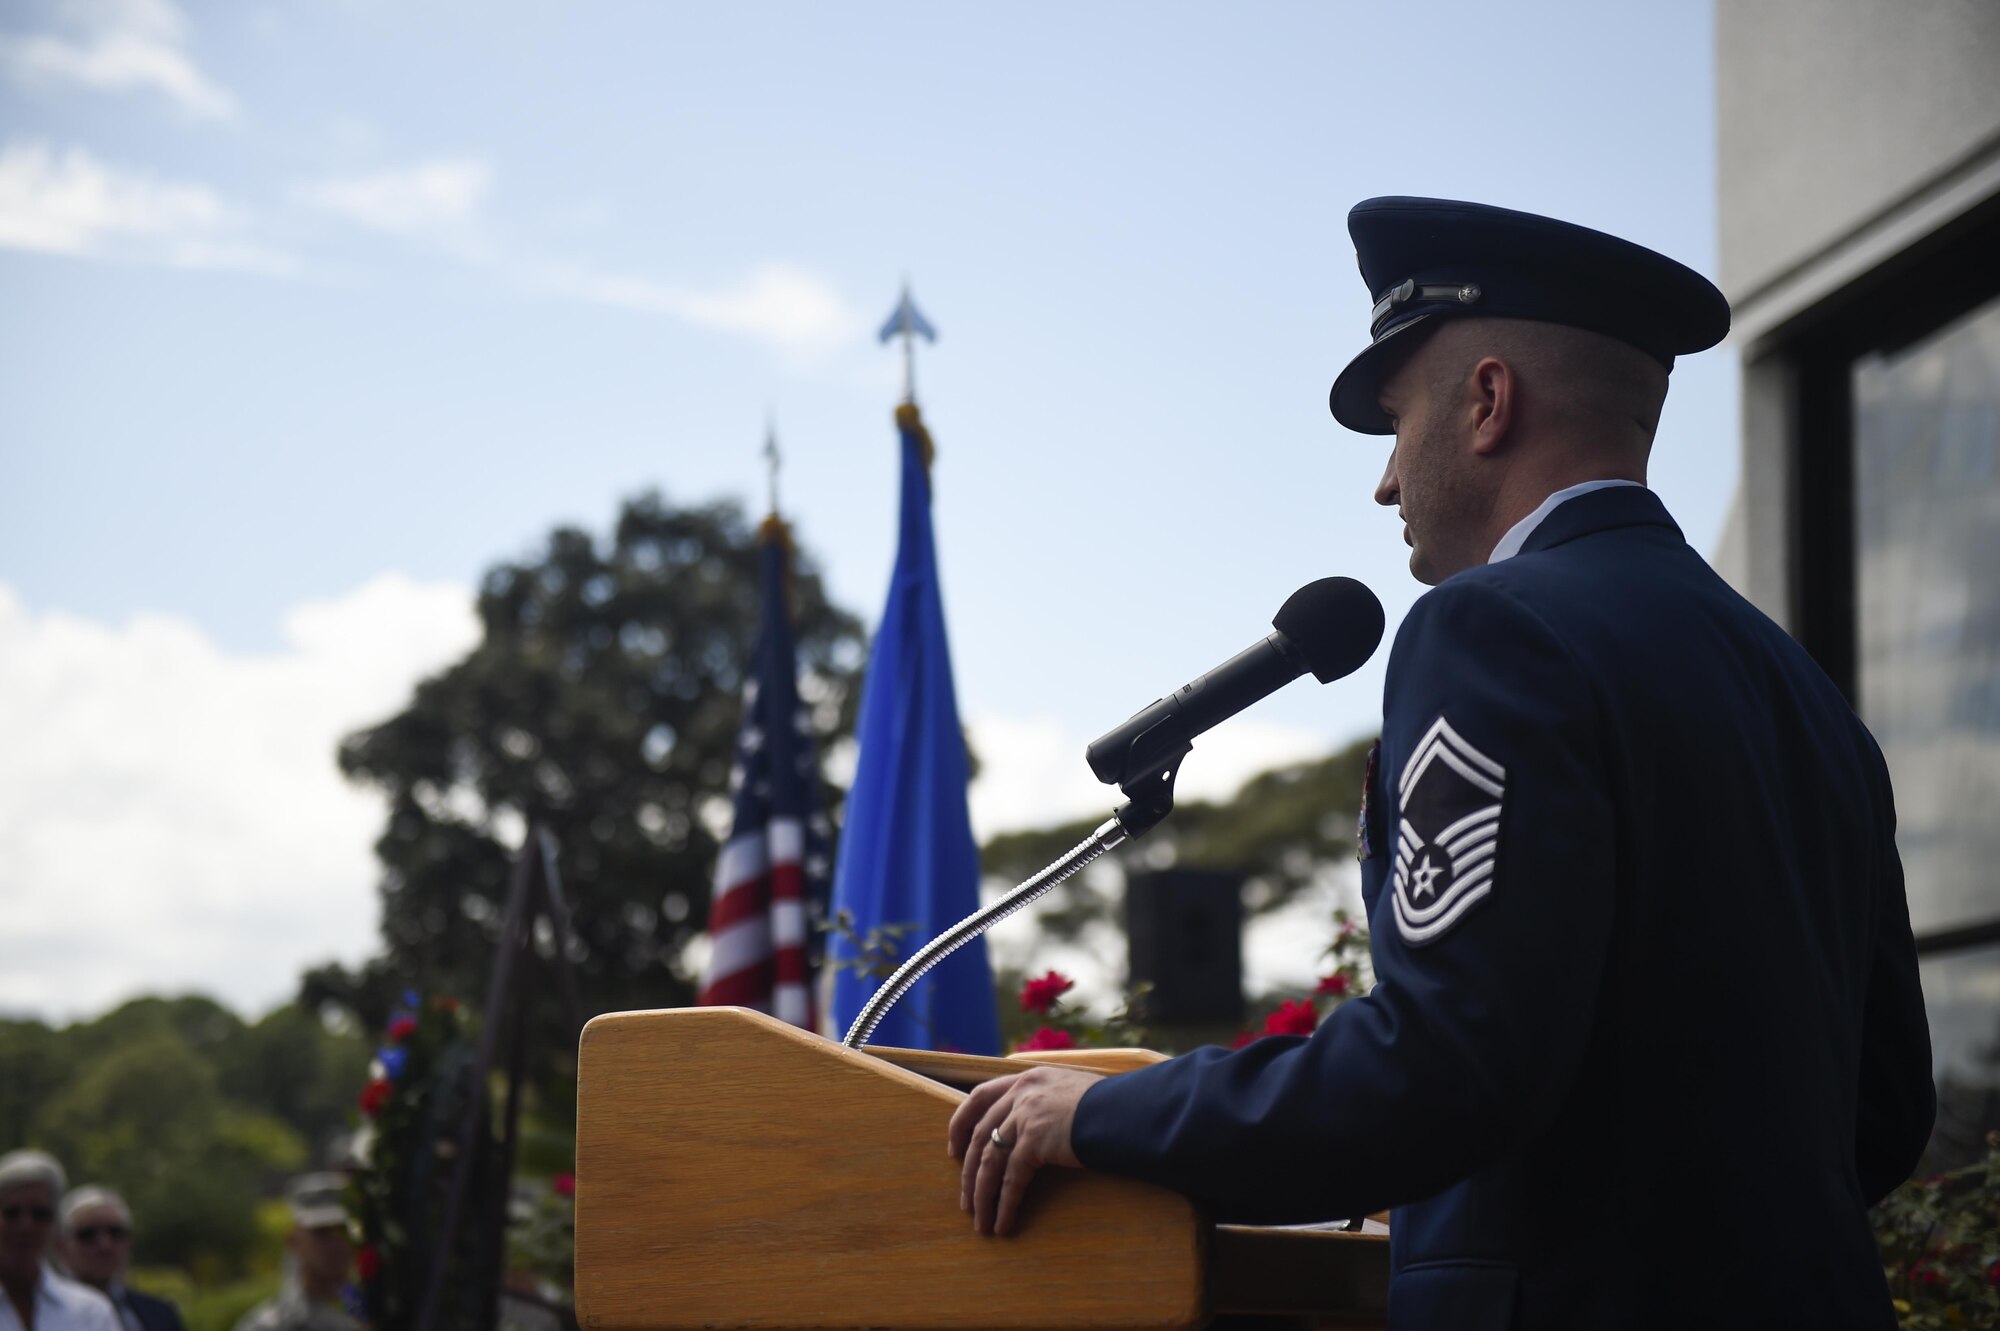 Senior Master Sgt. Kevin Forrest, the superintendent of the 8th Special Operations Squadron, provides closing remarks for the 36th anniversary of Operation Eagle Claw at Hurlburt Field, Fla., April 25, 2016. Operation Eagle Claw was an attempted rescue mission April 24, 1980, into Iran to recover more than 50 American hostages who were captured after a group of radicals took over the American embassy in Tehran, Nov. 4, 1979. The mission resulted in the deaths of eight service members at a remote site deep in Iranian territory known as Desert One. (U.S. Air Force photo Airman 1st Class Kai White)